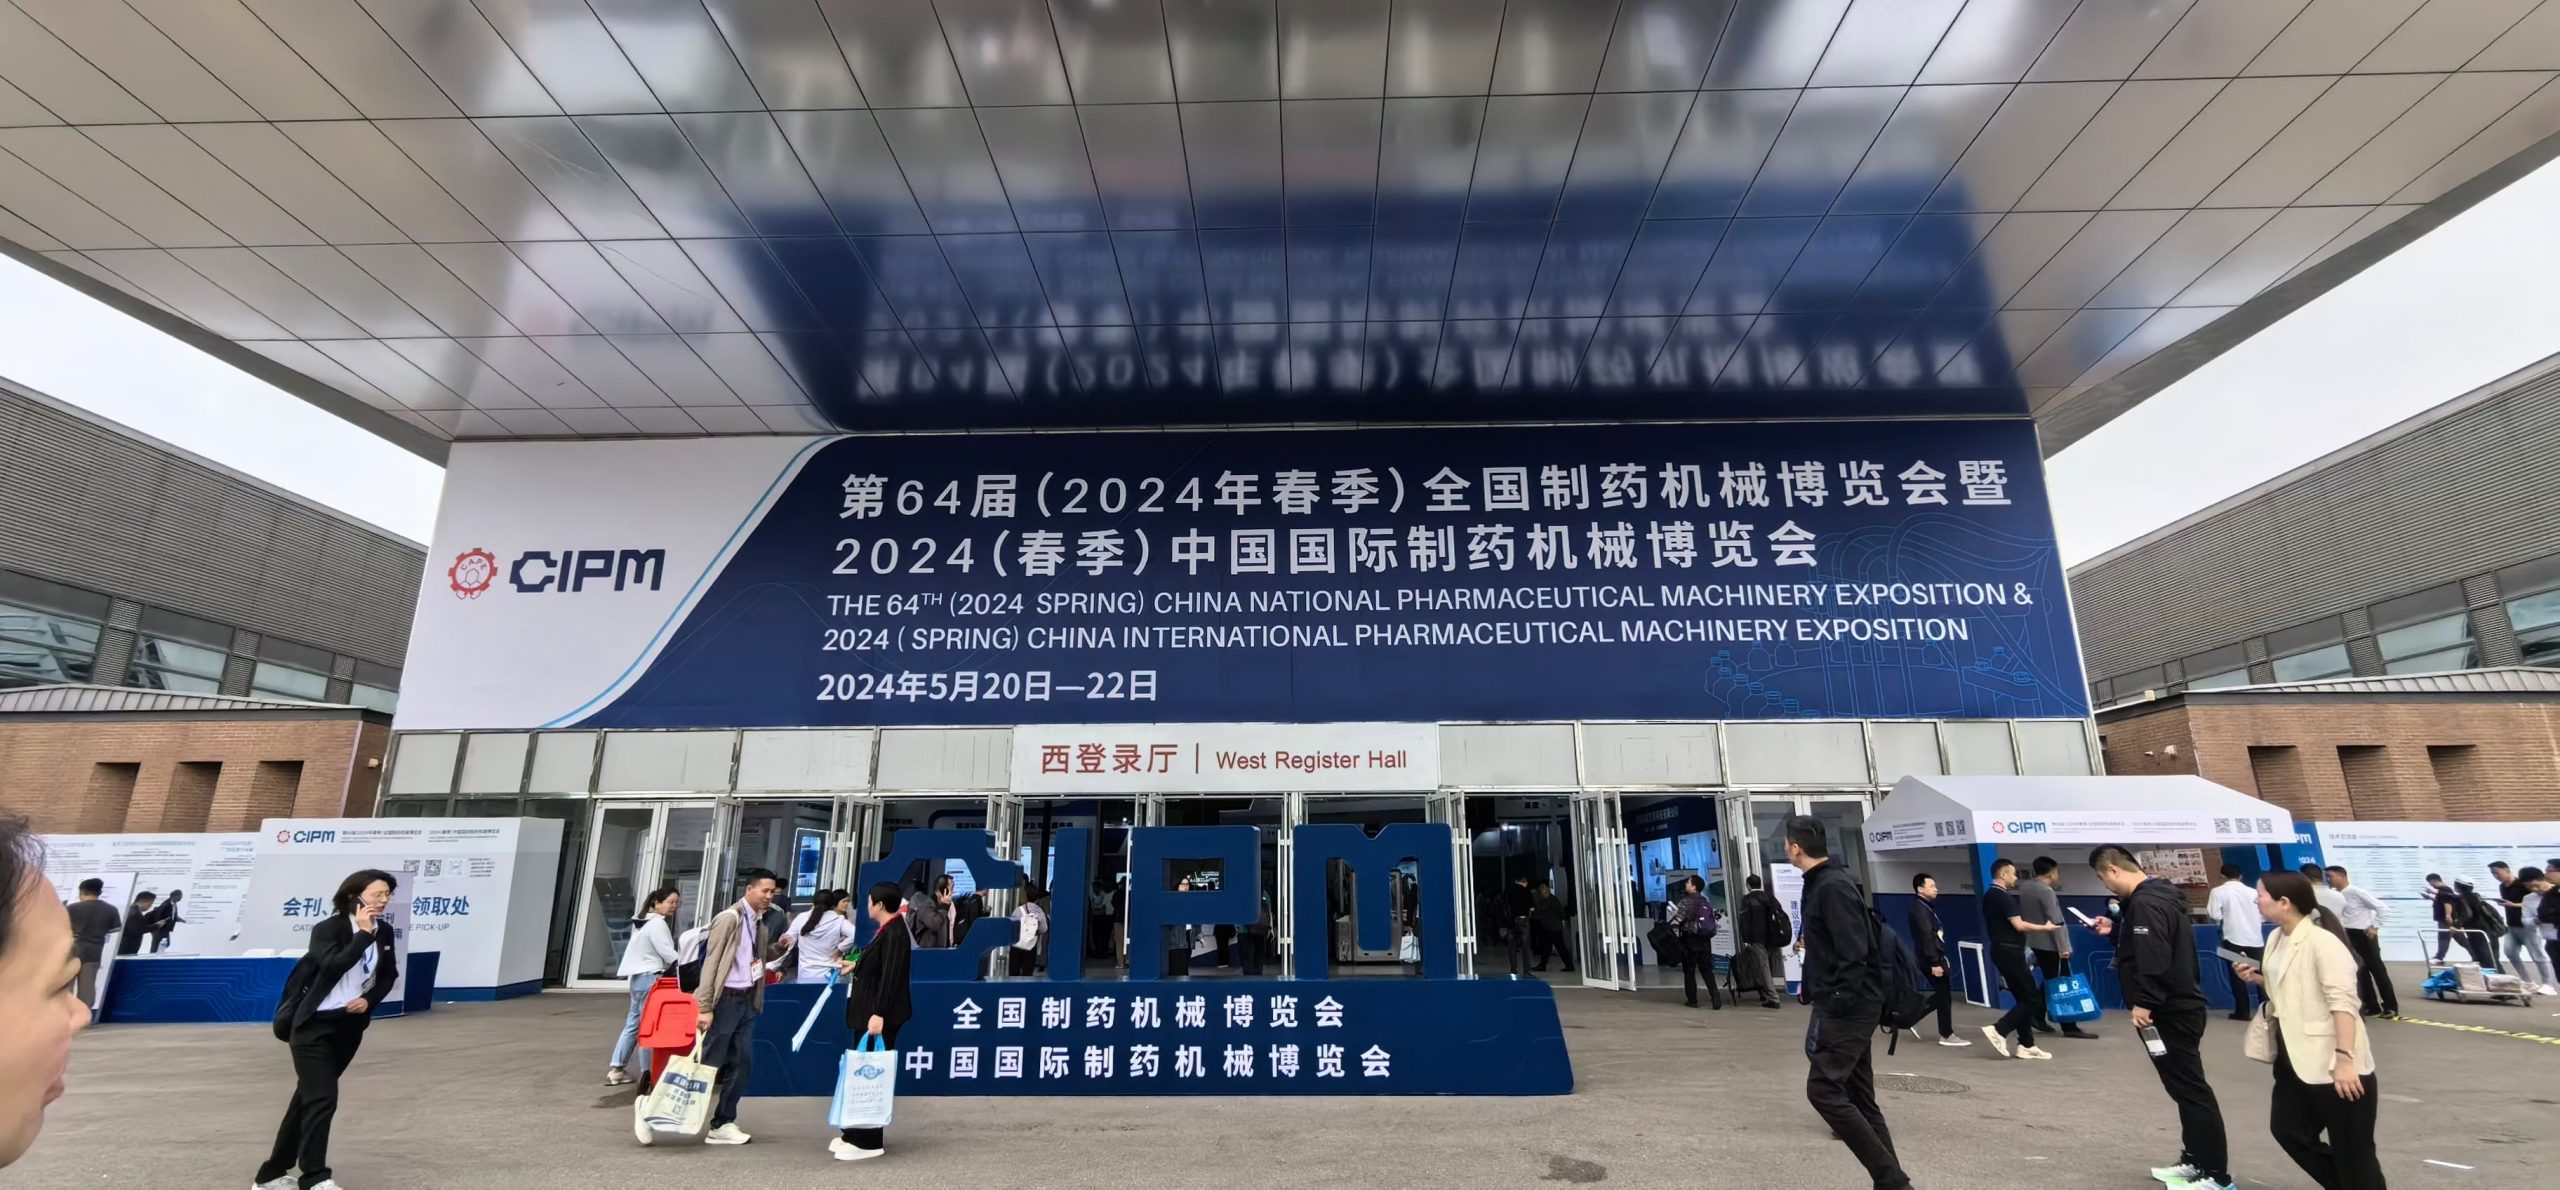 CIPM: THE 64th 2024(SPRING) CHINA INTERNATIONAL PHARMACEUTICAL MACHINERY EXPOSITION